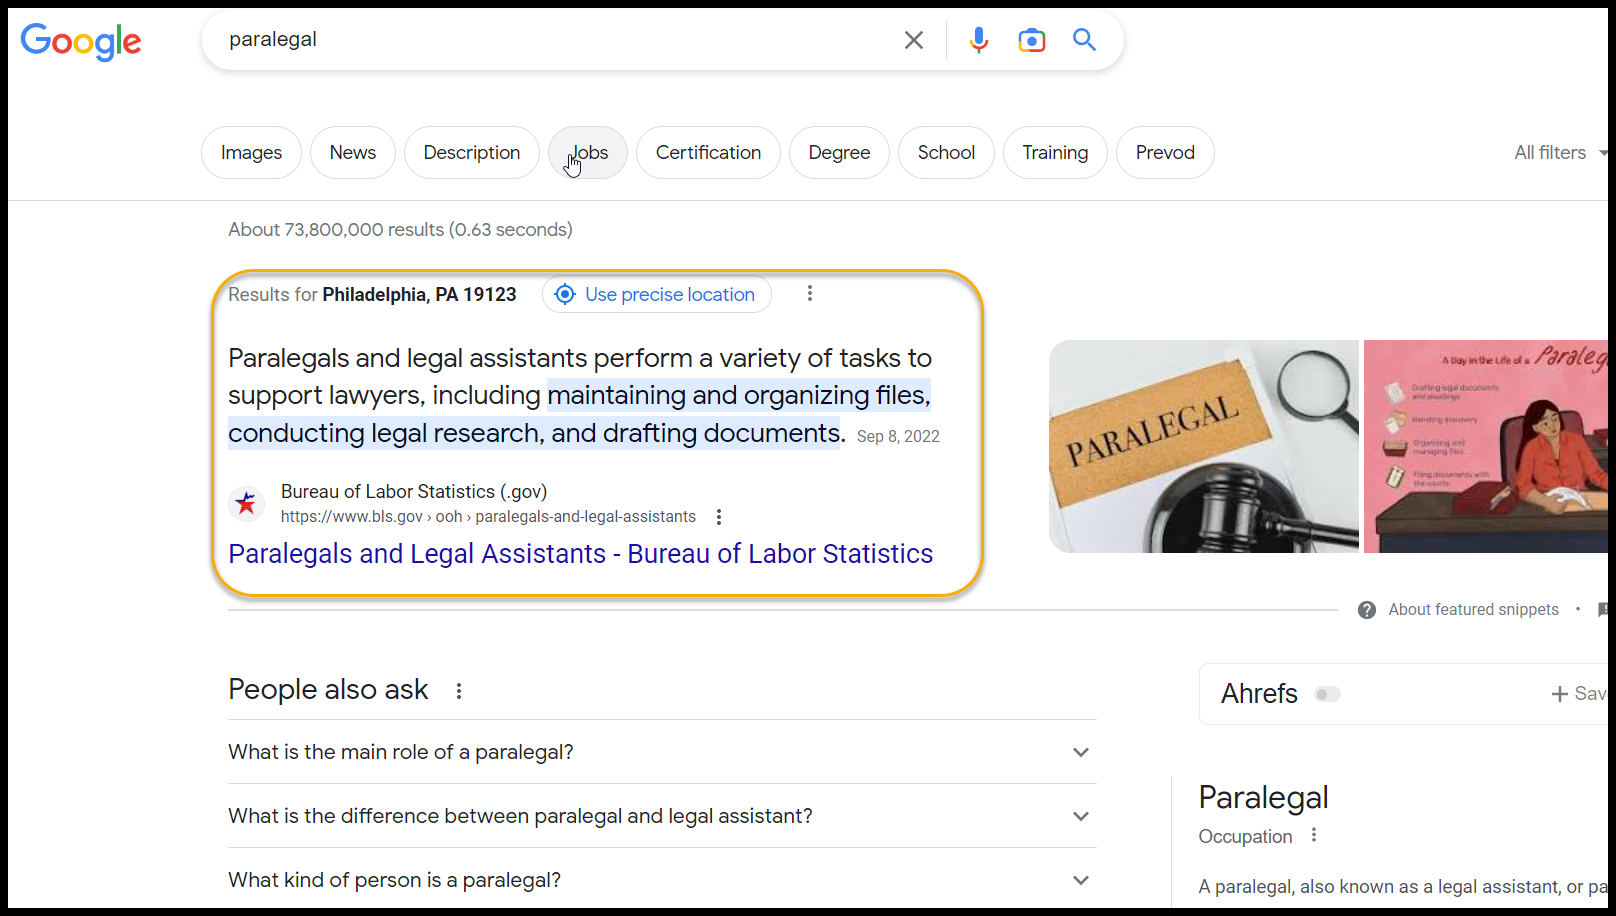 google search for paralegal has a answerbox and a people also ask